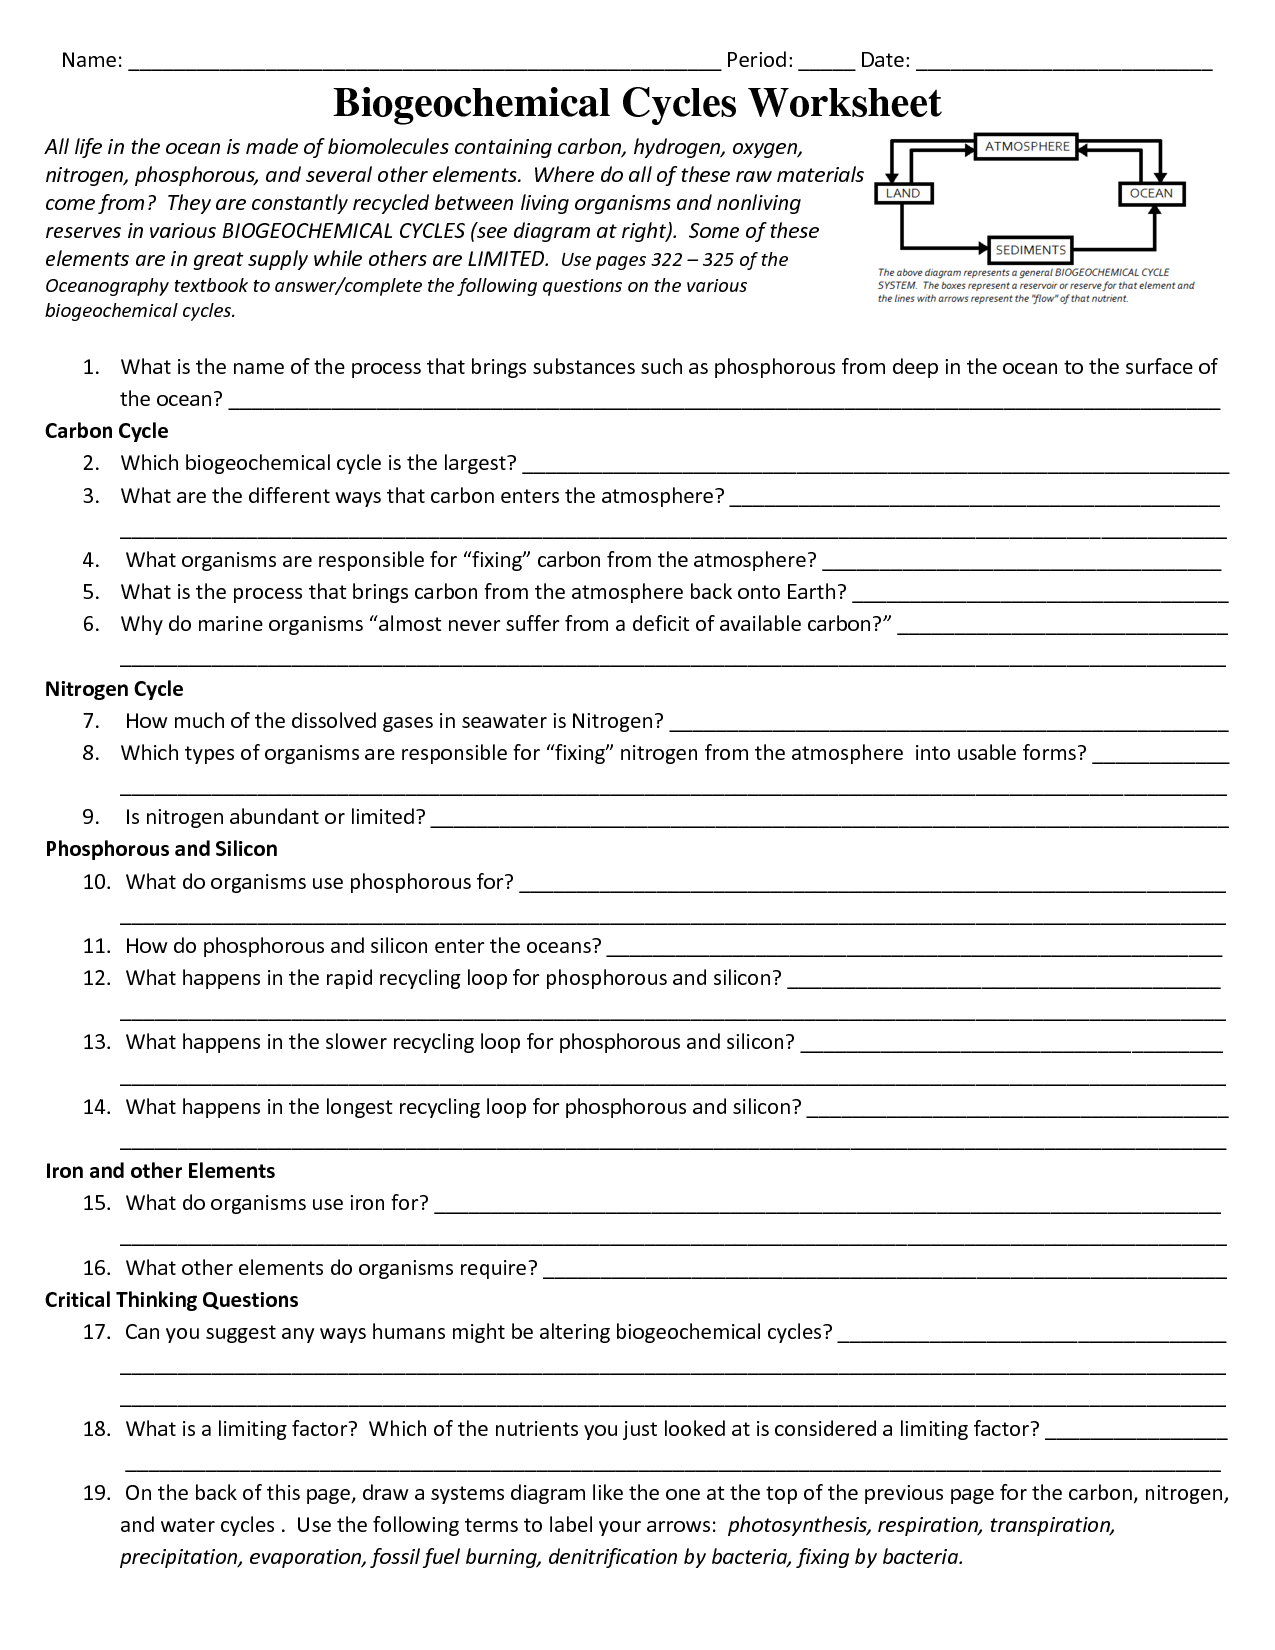 17-best-images-of-nitrogen-cycle-worksheet-middle-school-carbon-cycle-worksheet-answer-key